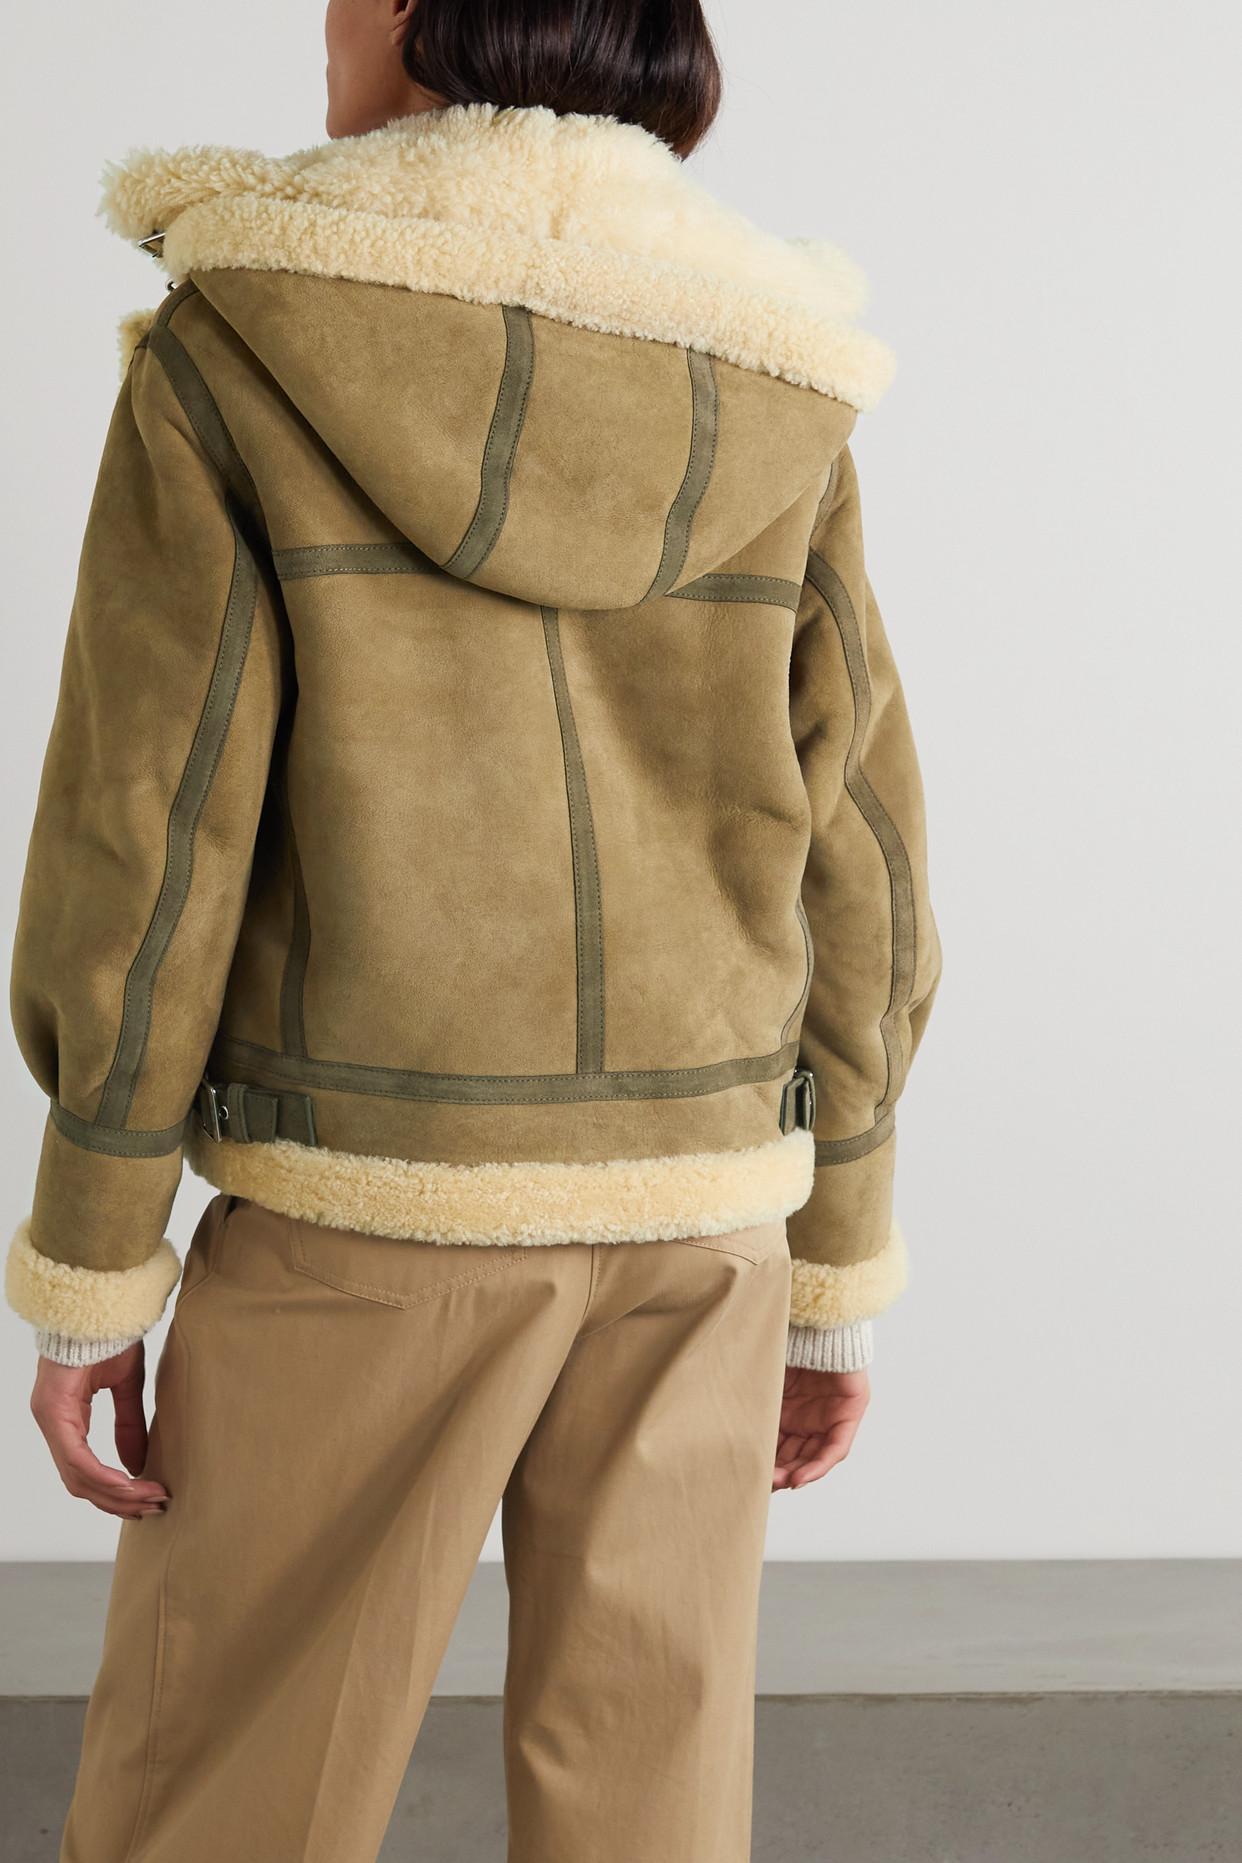 Chloé Hooded Suede-trimmed Shearling Jacket in Green - Lyst